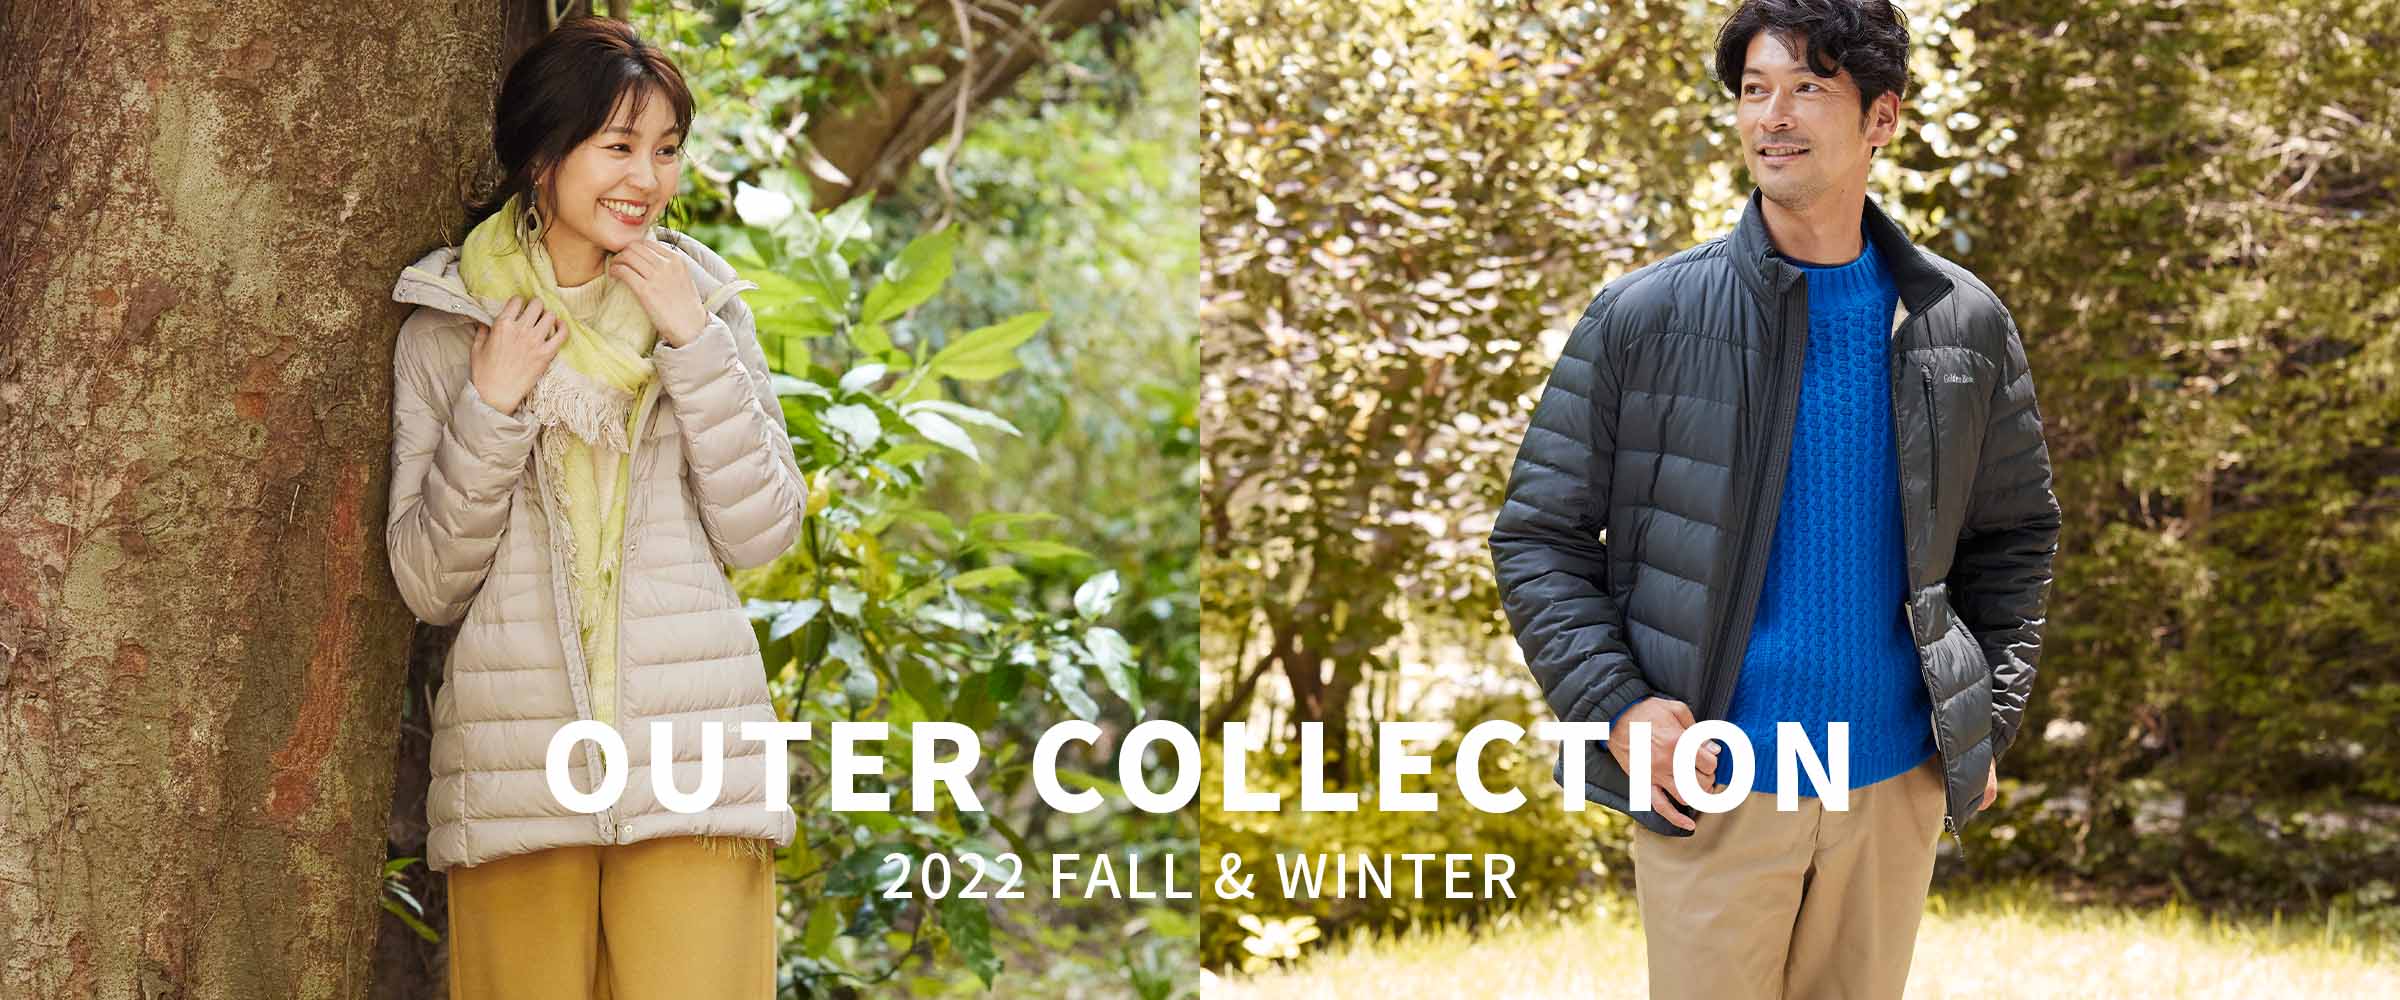 OUTER COLLECTION | ゴールデンベアストア